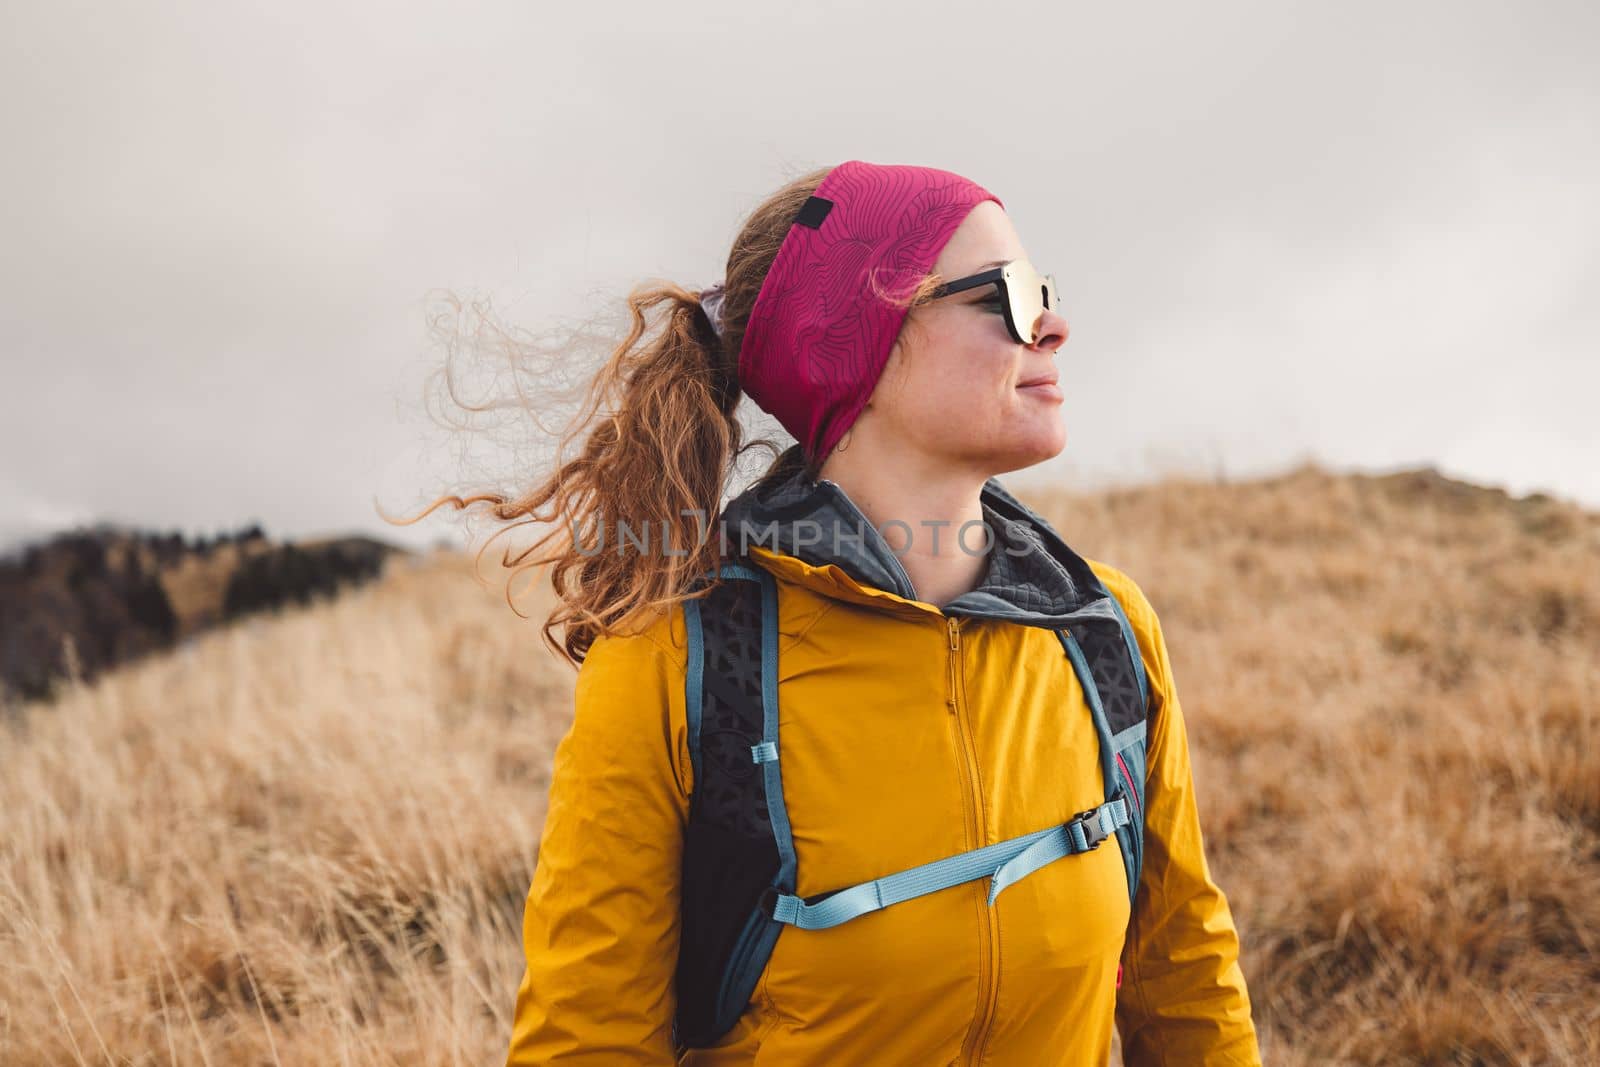 Caucasian woman hiker in yellow jacket and pink backpack hiking in the mountains on an autumn day, wearing gloves and headband. 